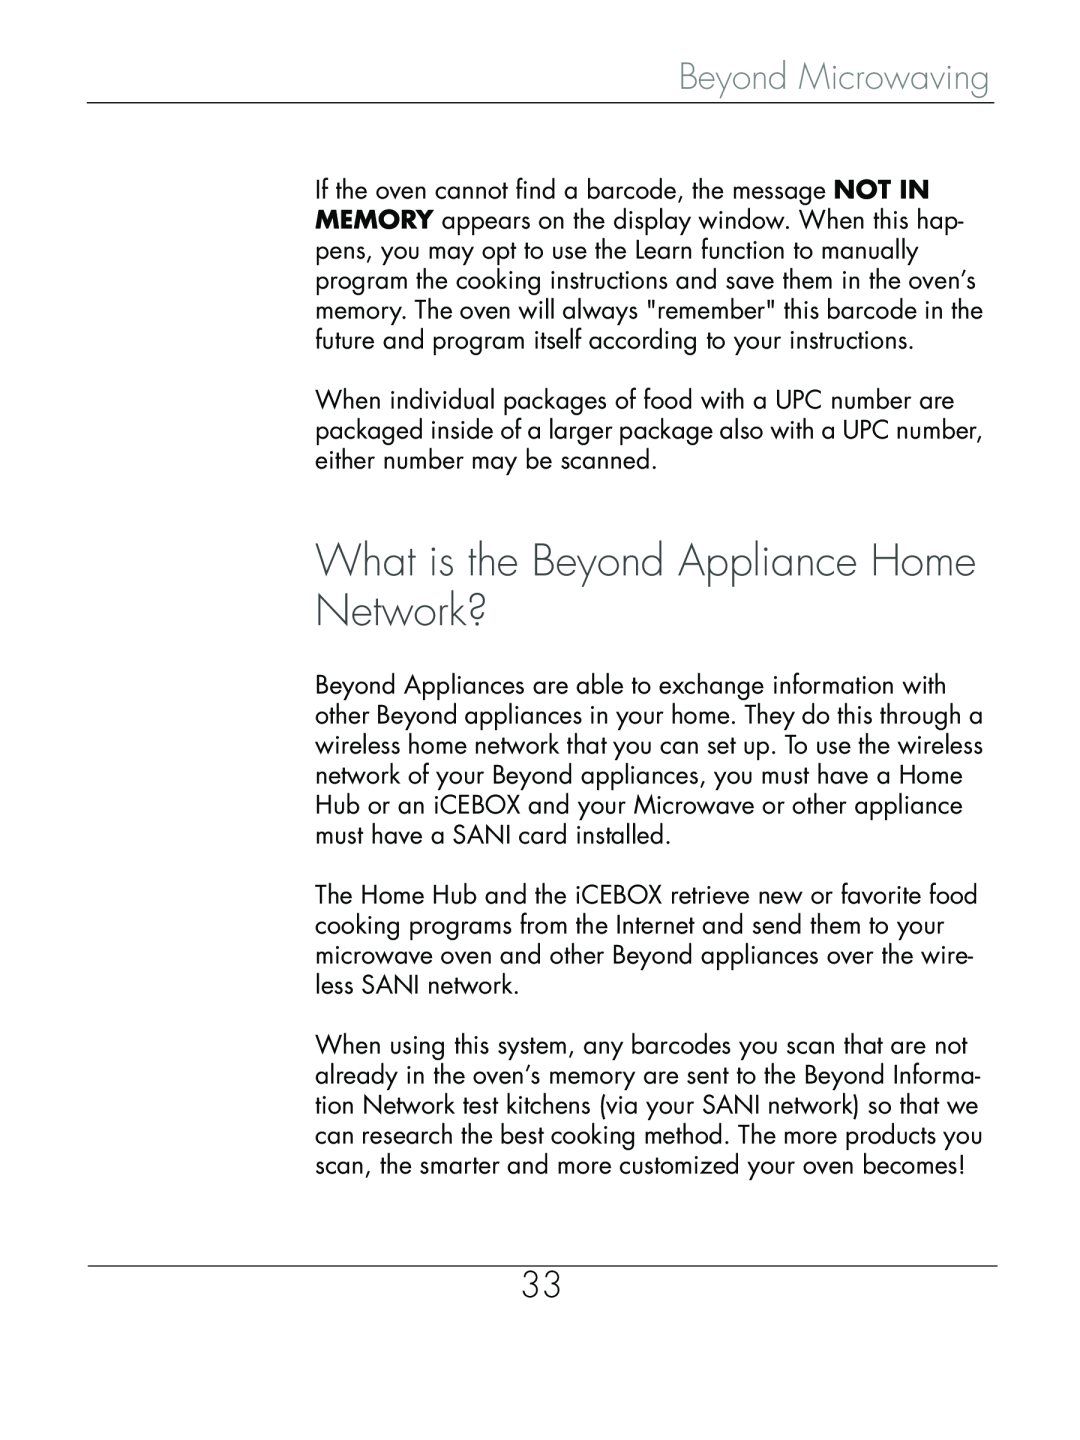 Beyond Microwace Oven manual What is the Beyond Appliance Home Network?, Beyond Microwaving 